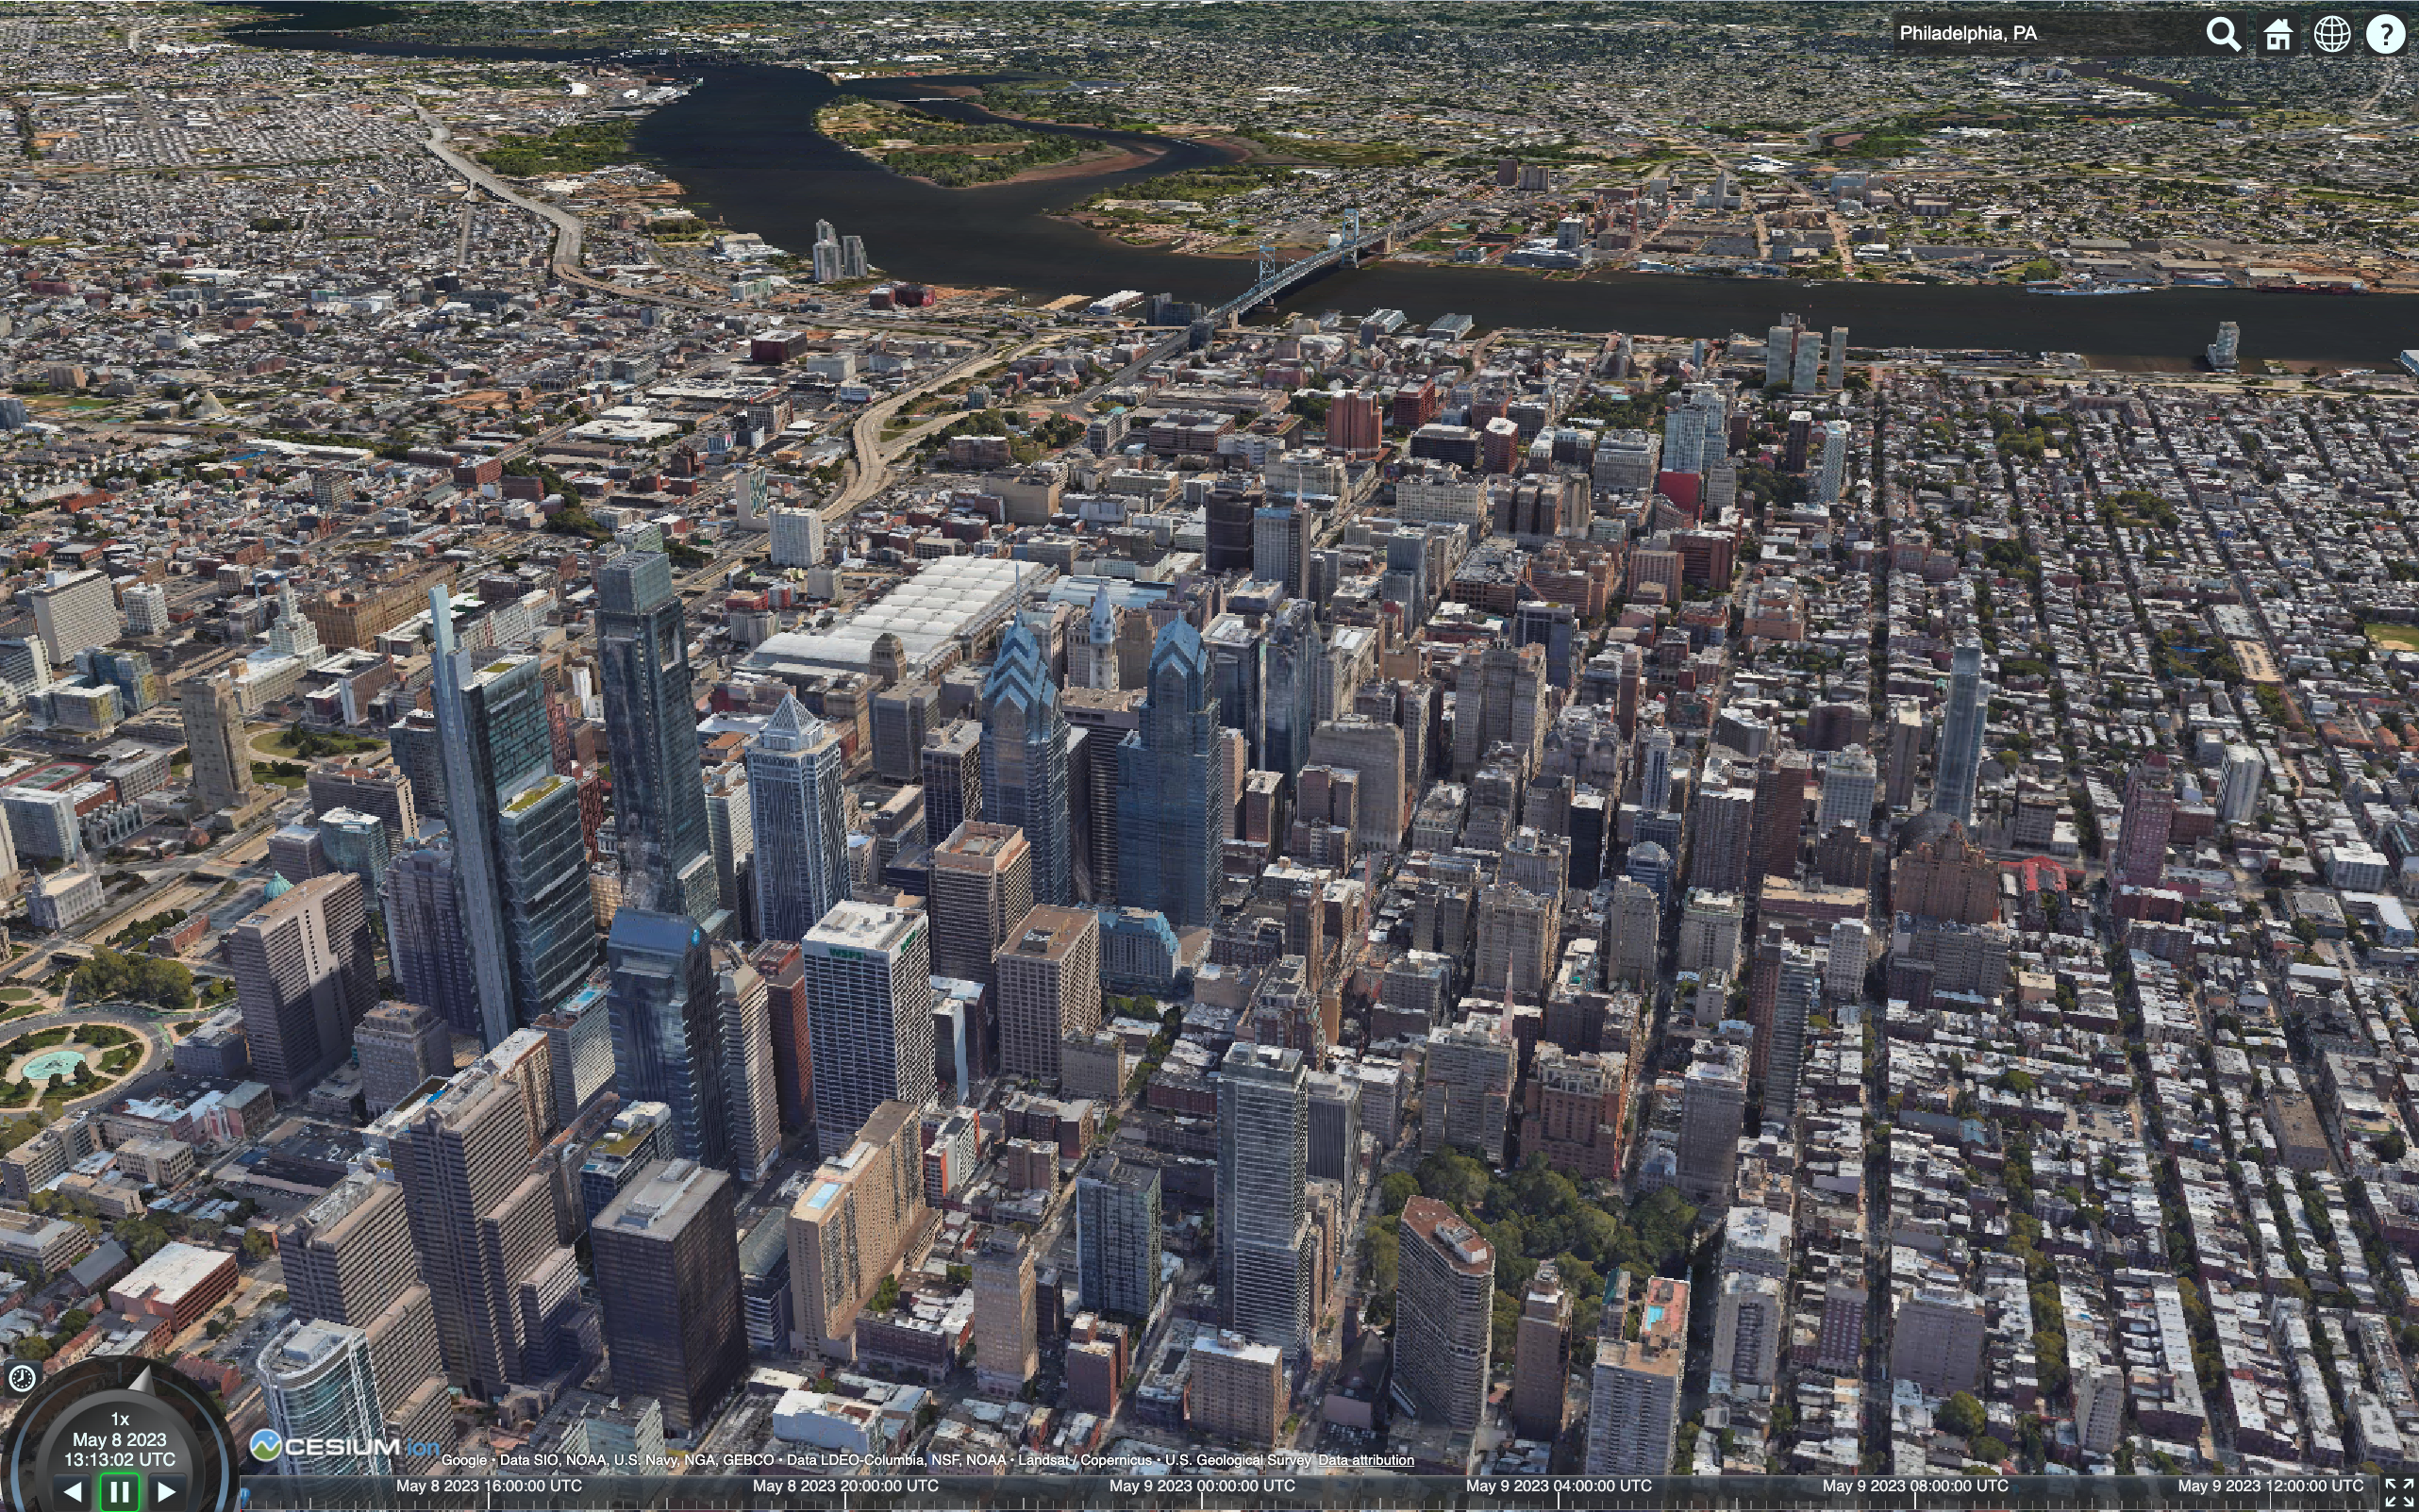 Use the mouse and keyboard to zoom, pan, and tilt to explore Philadelphia in full 3D.